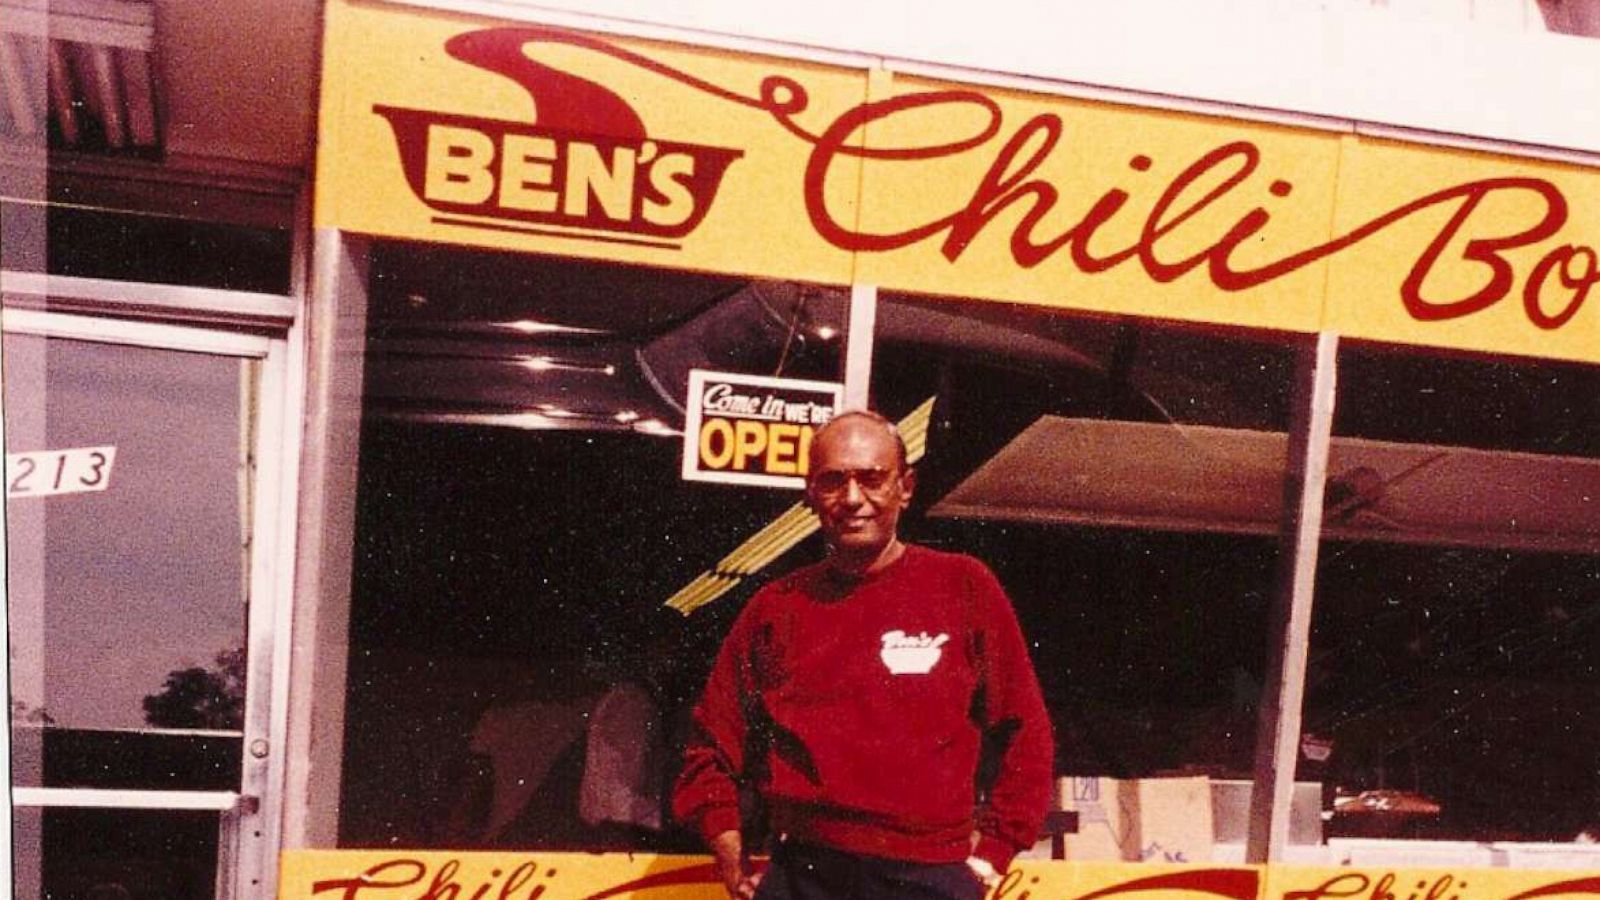 Ben's Chili Bowl, iconic DC business, obtains critical federal loan - ABC  News